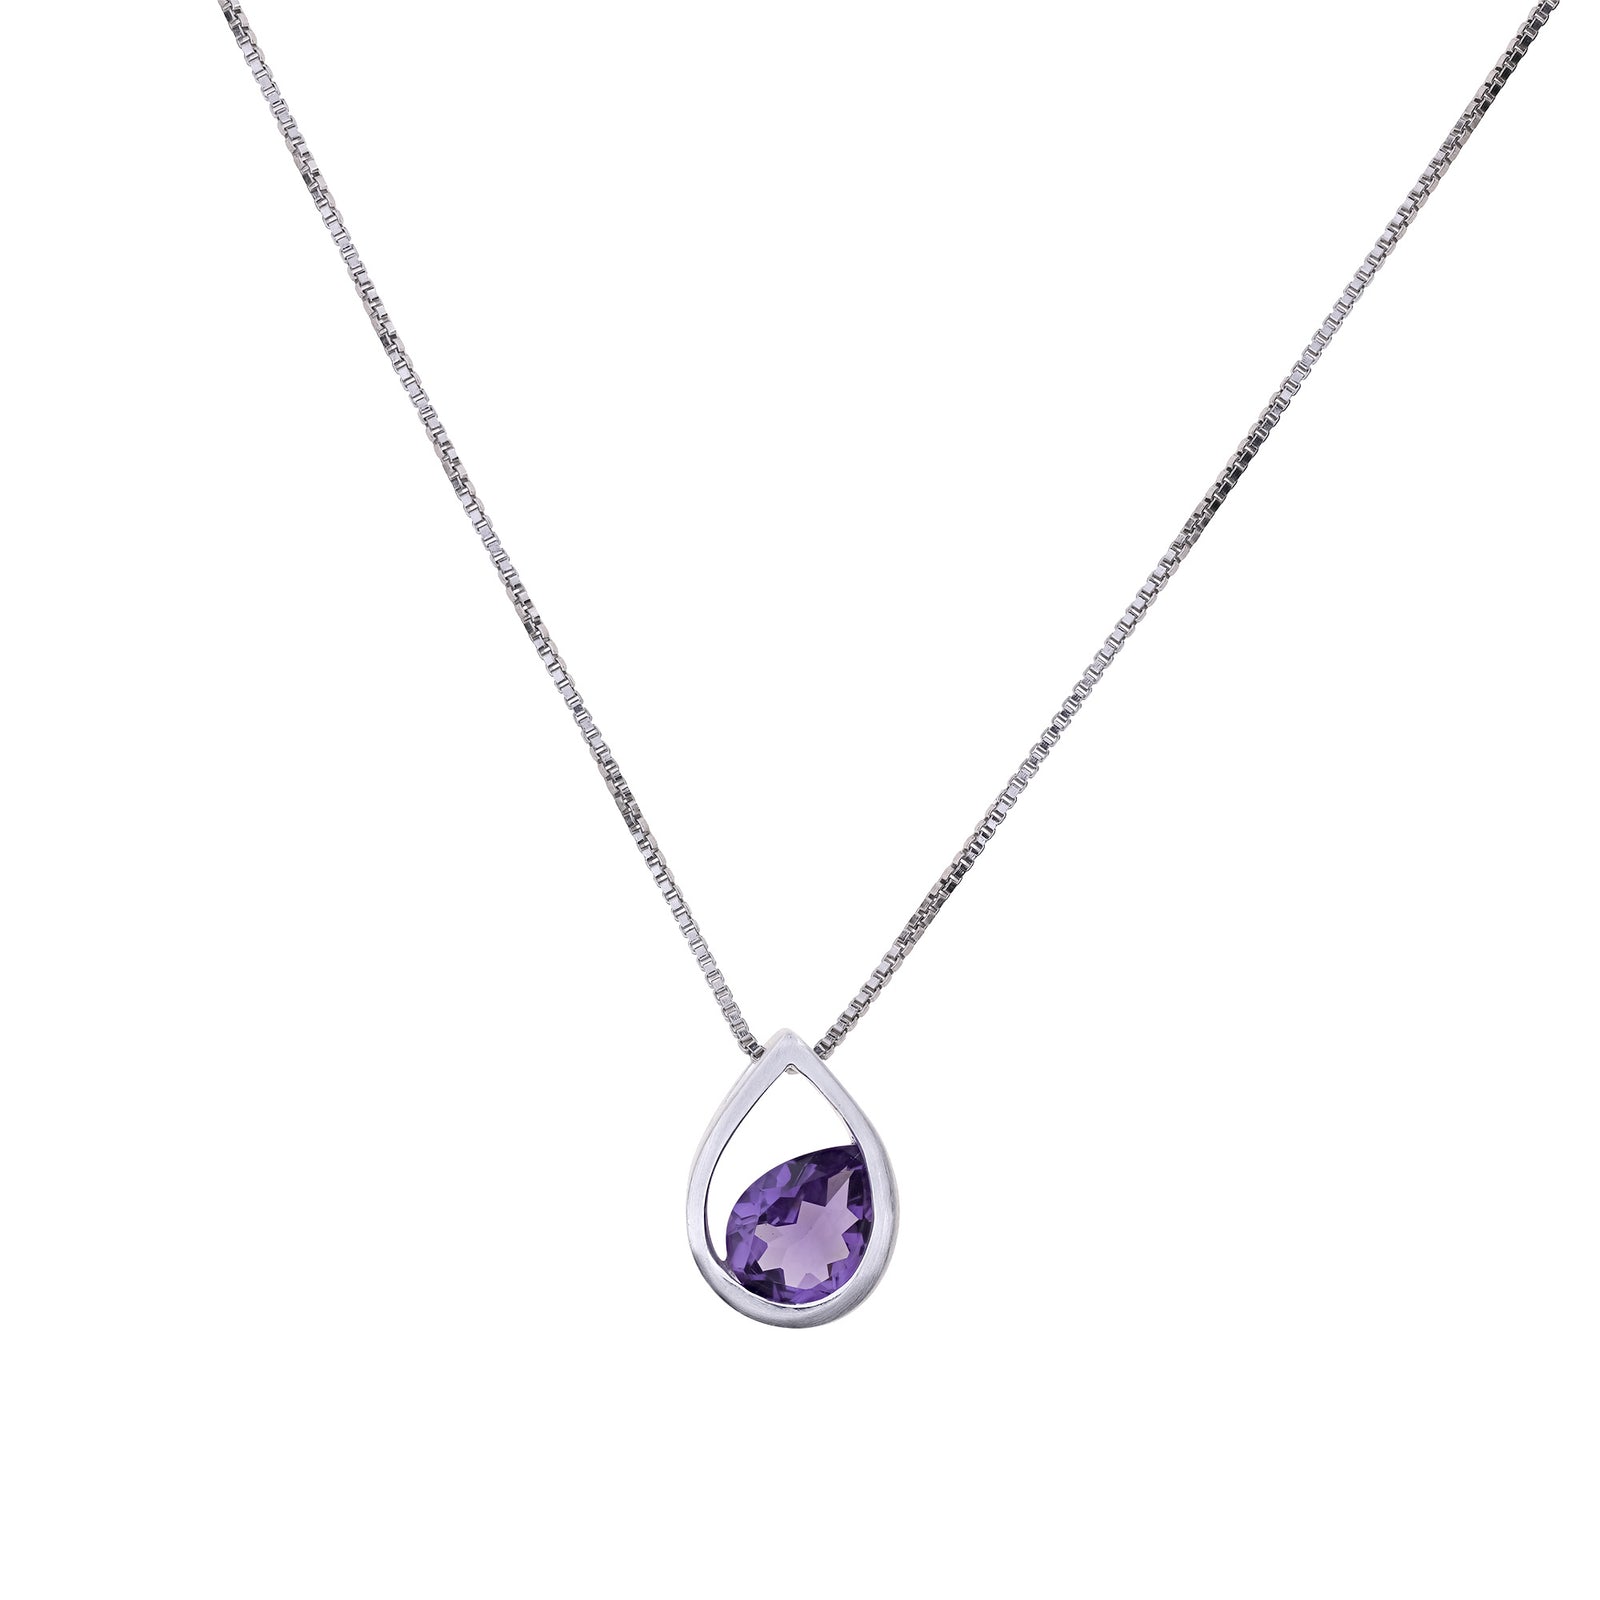 Silver Droplet Pendant with Amethyst